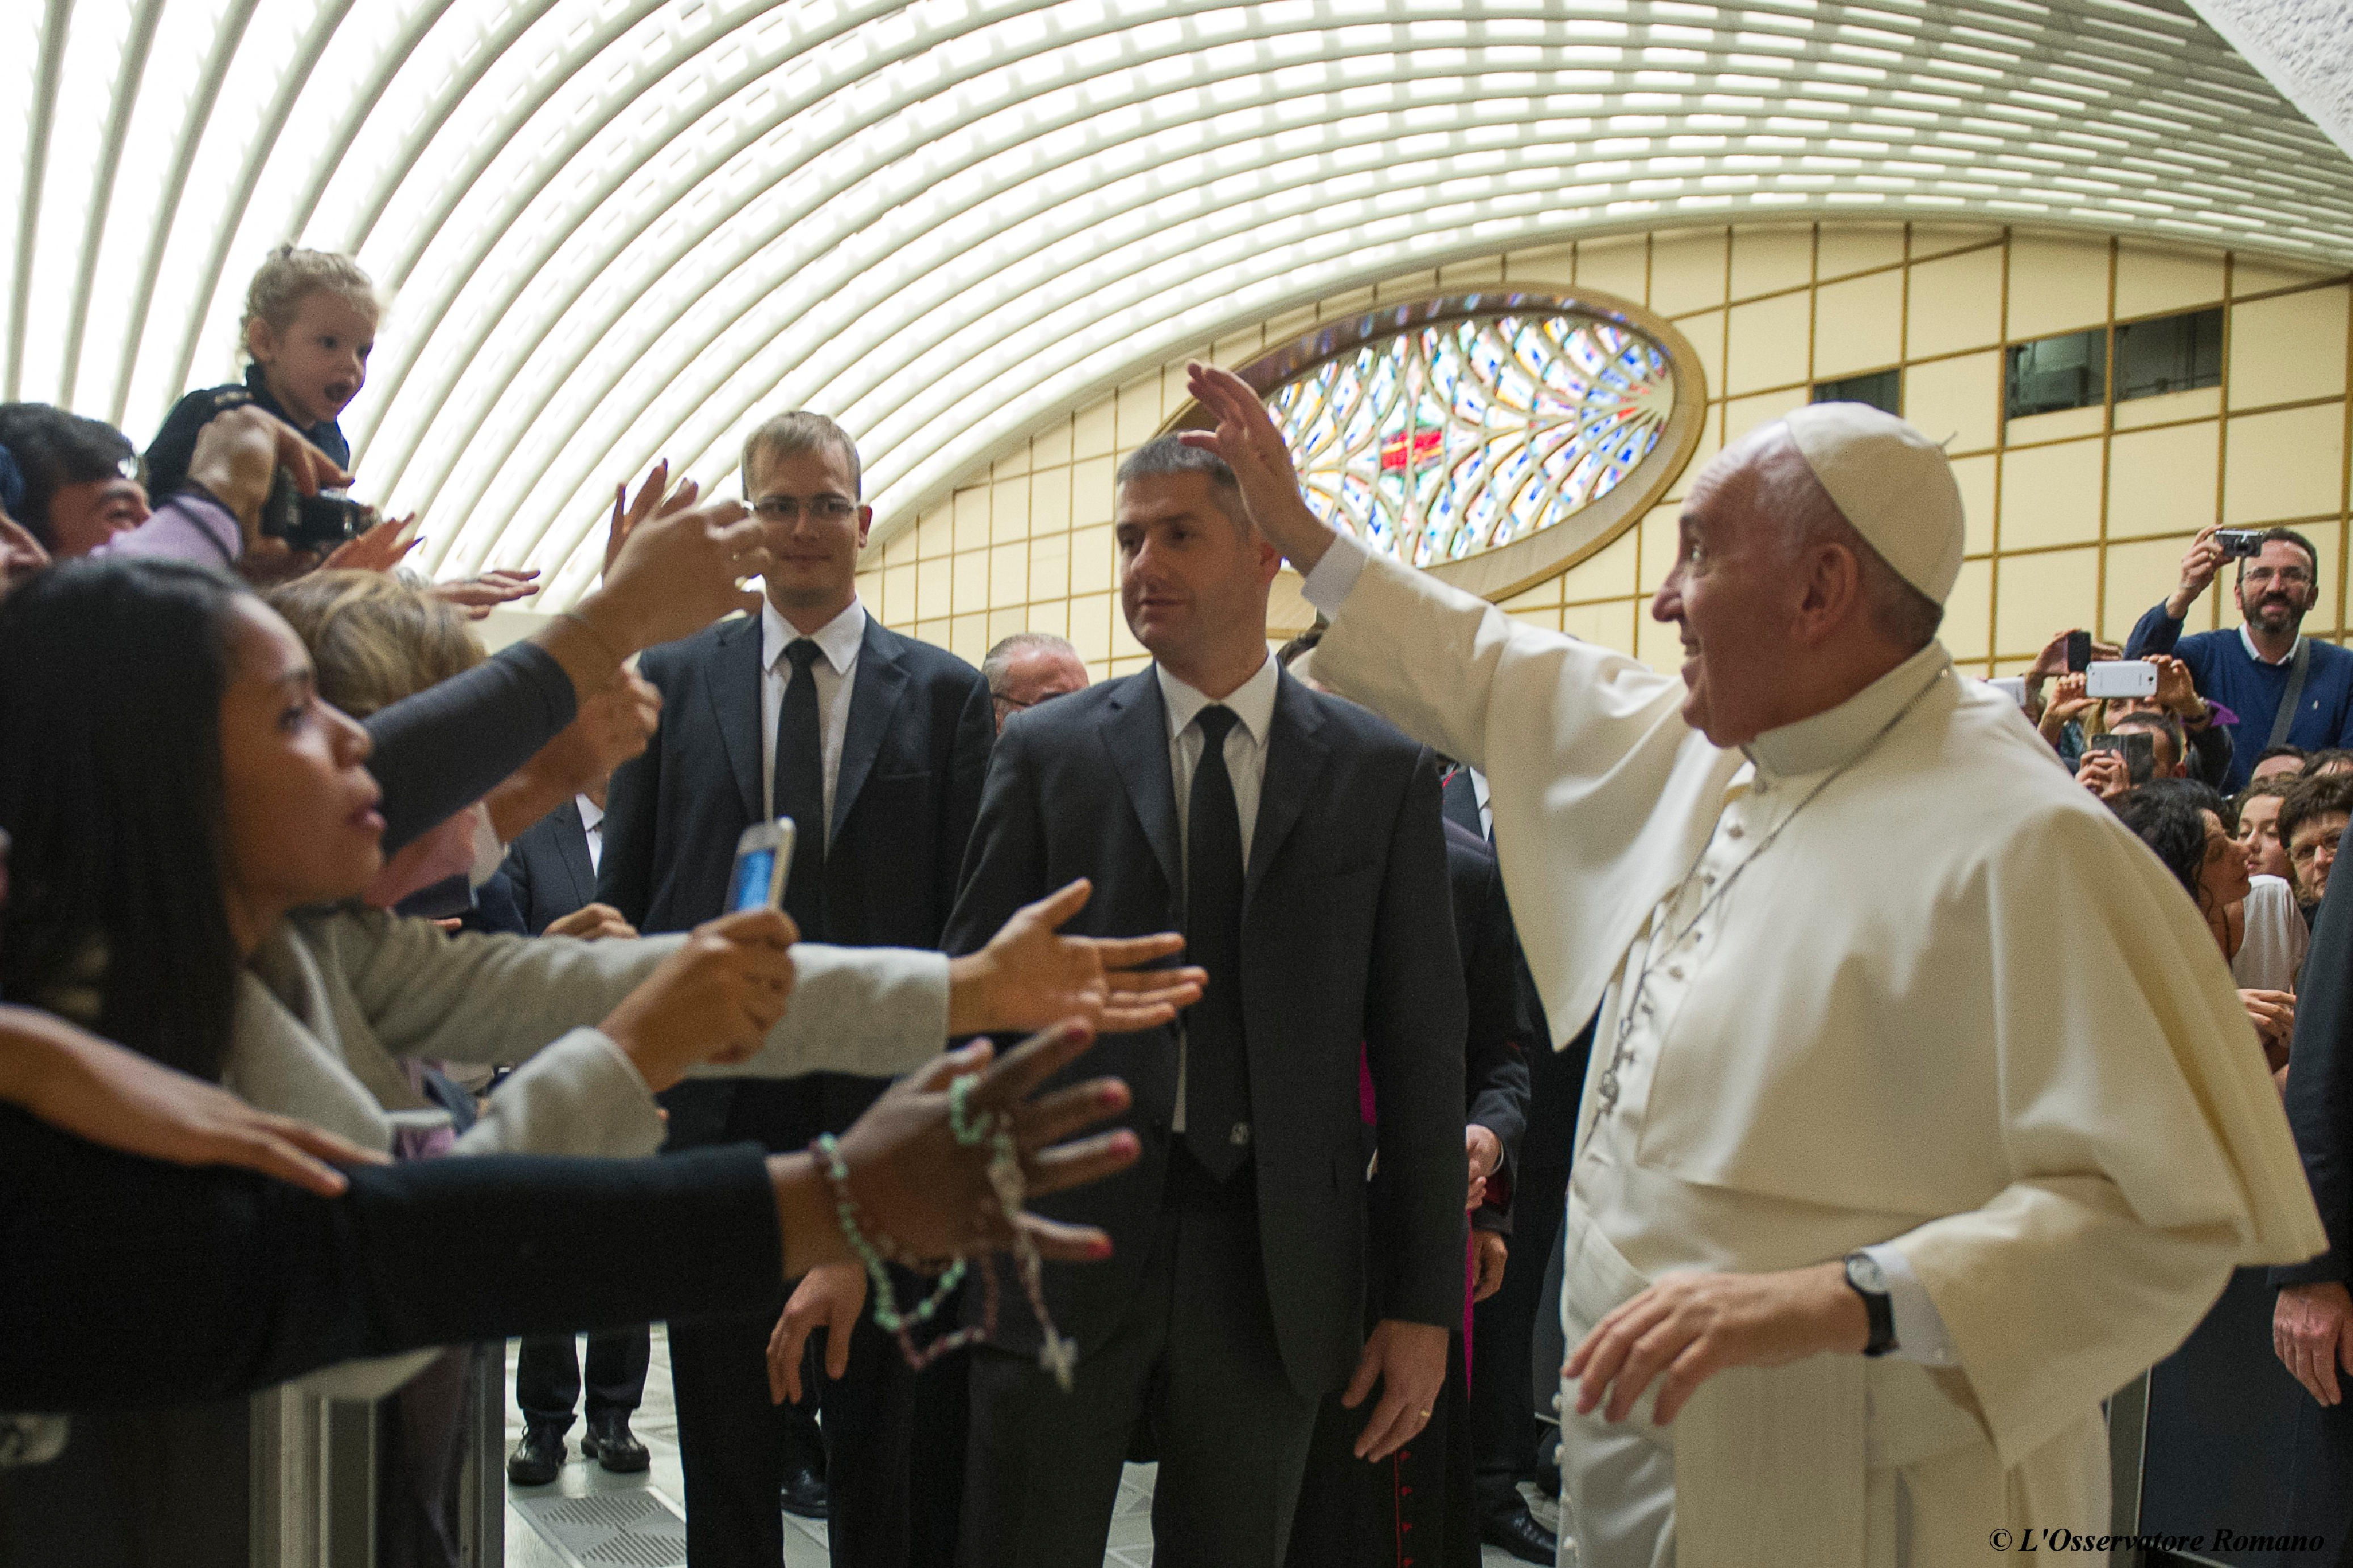 Papal Audience to Christian Union of Italian Business Executives (UCID)